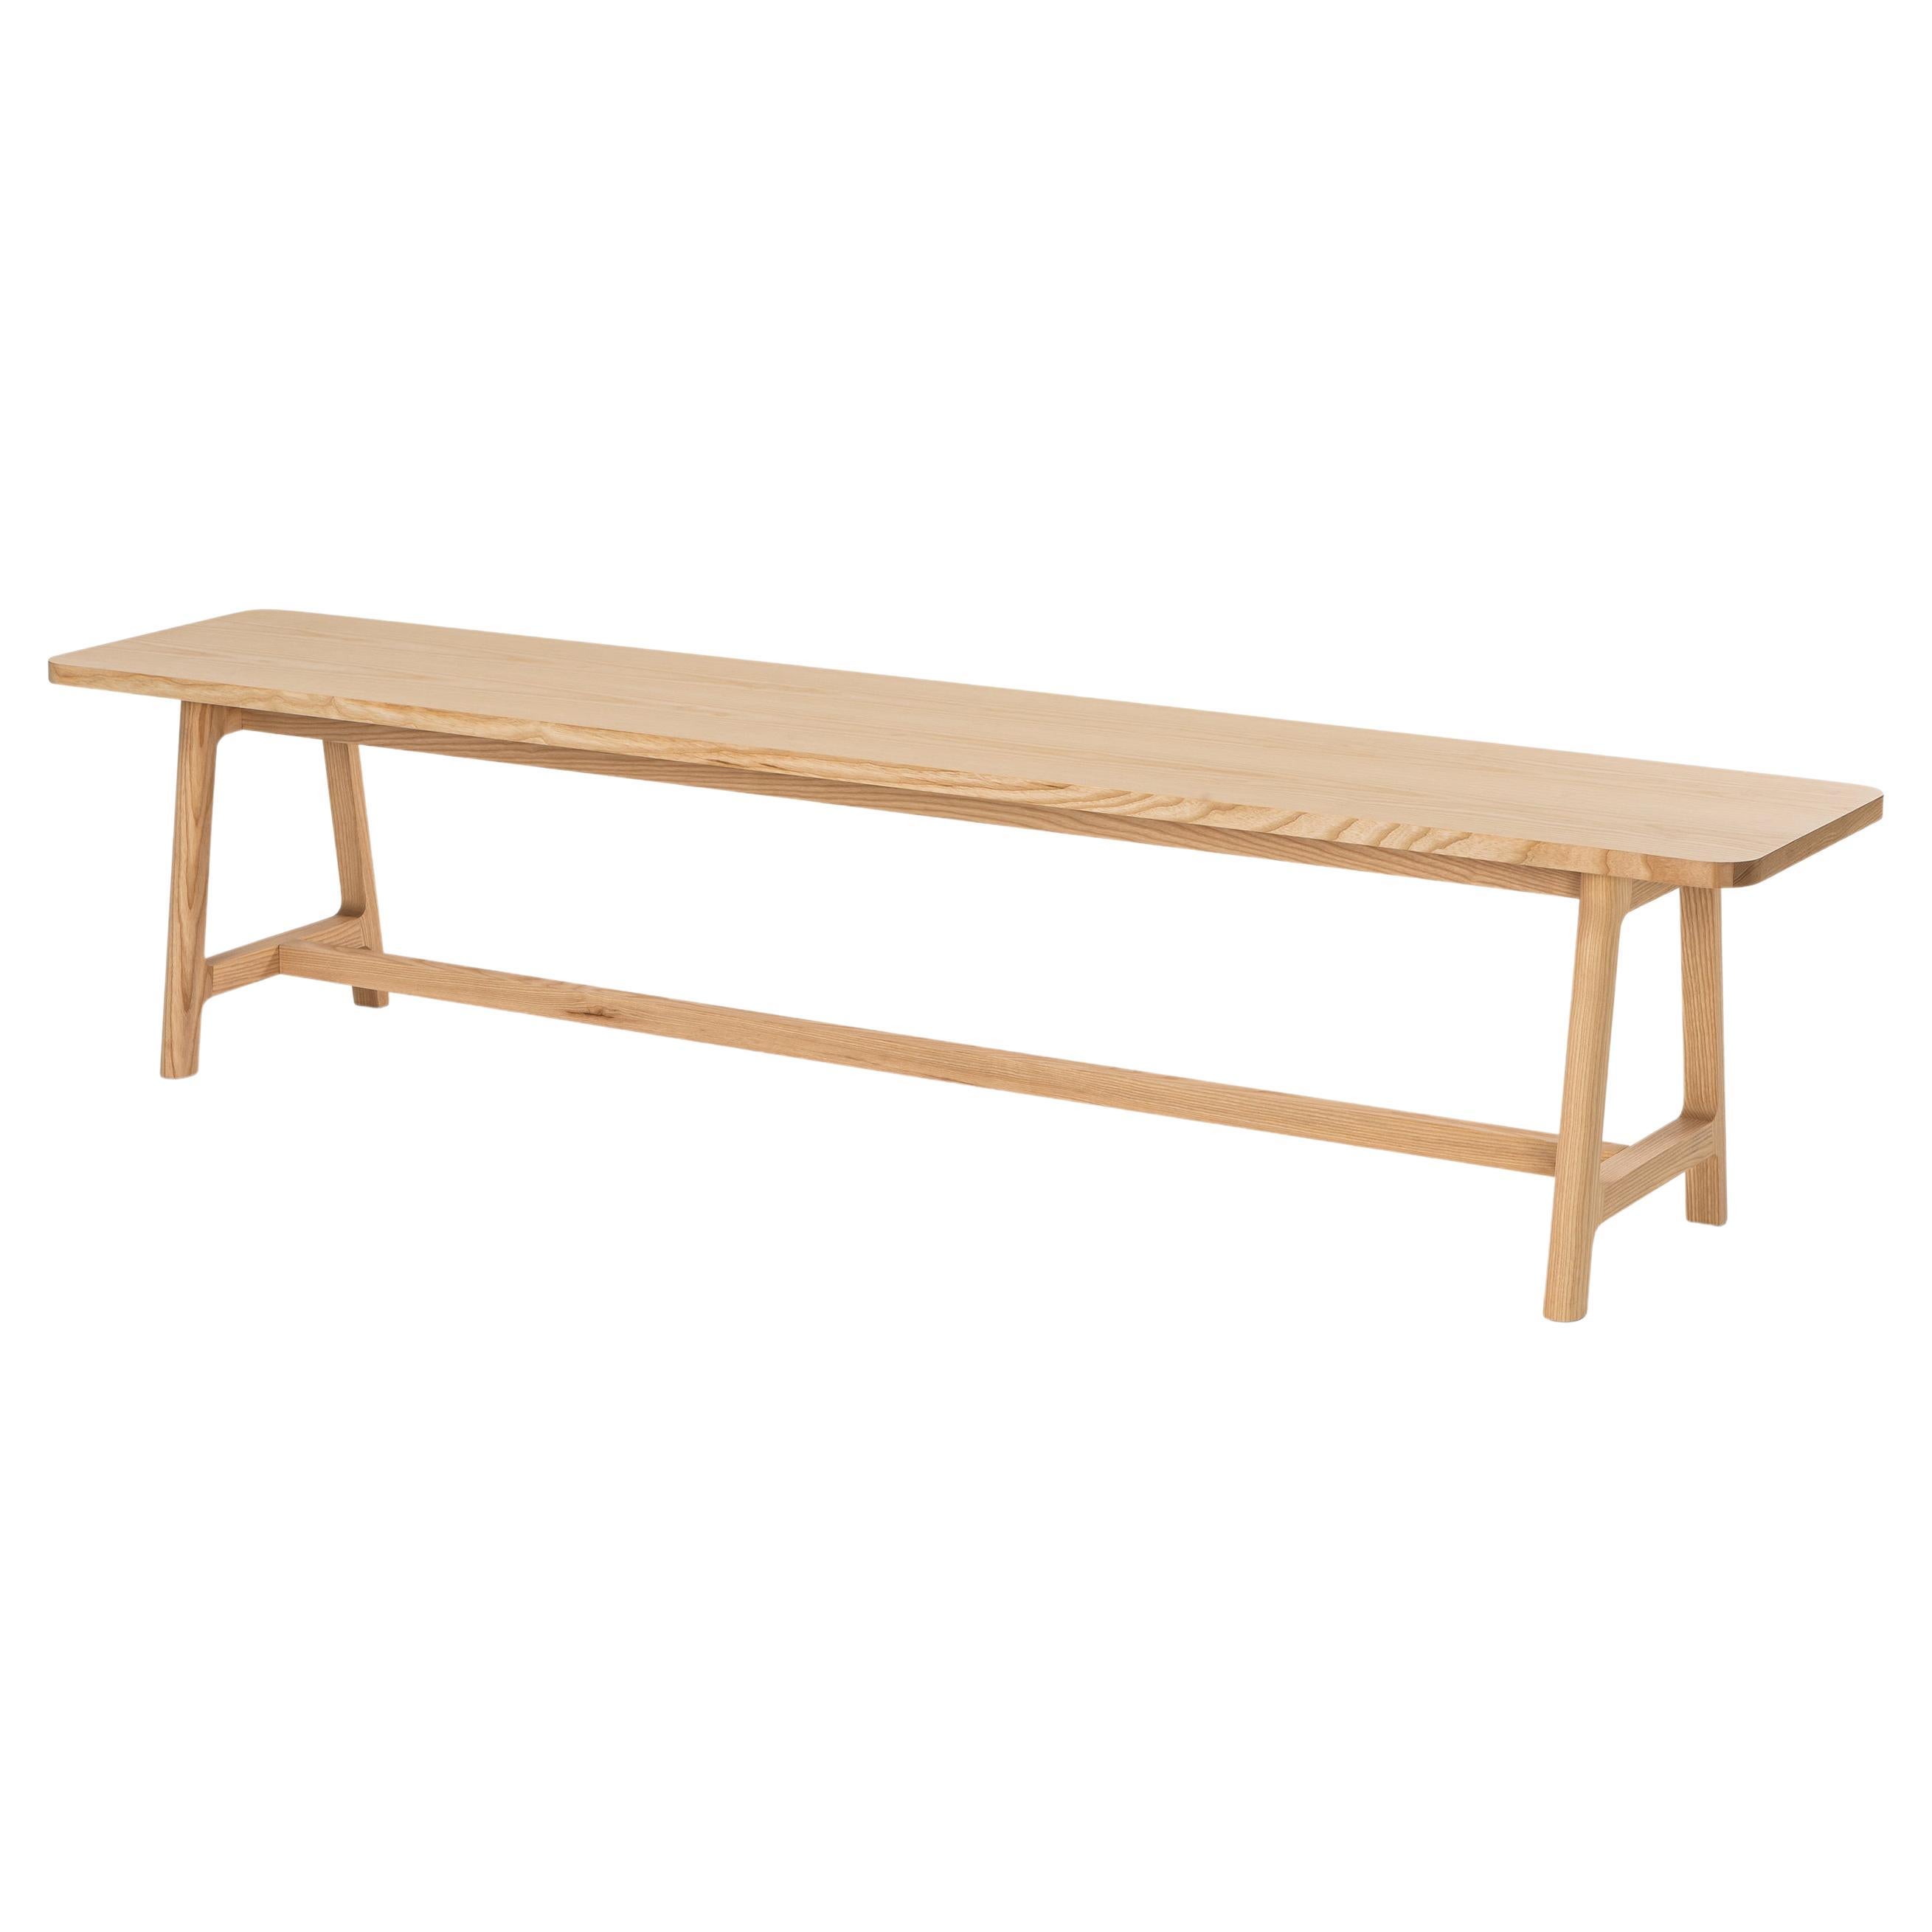 Minimalist Modern Bench in Ash Wood FRAME Collection